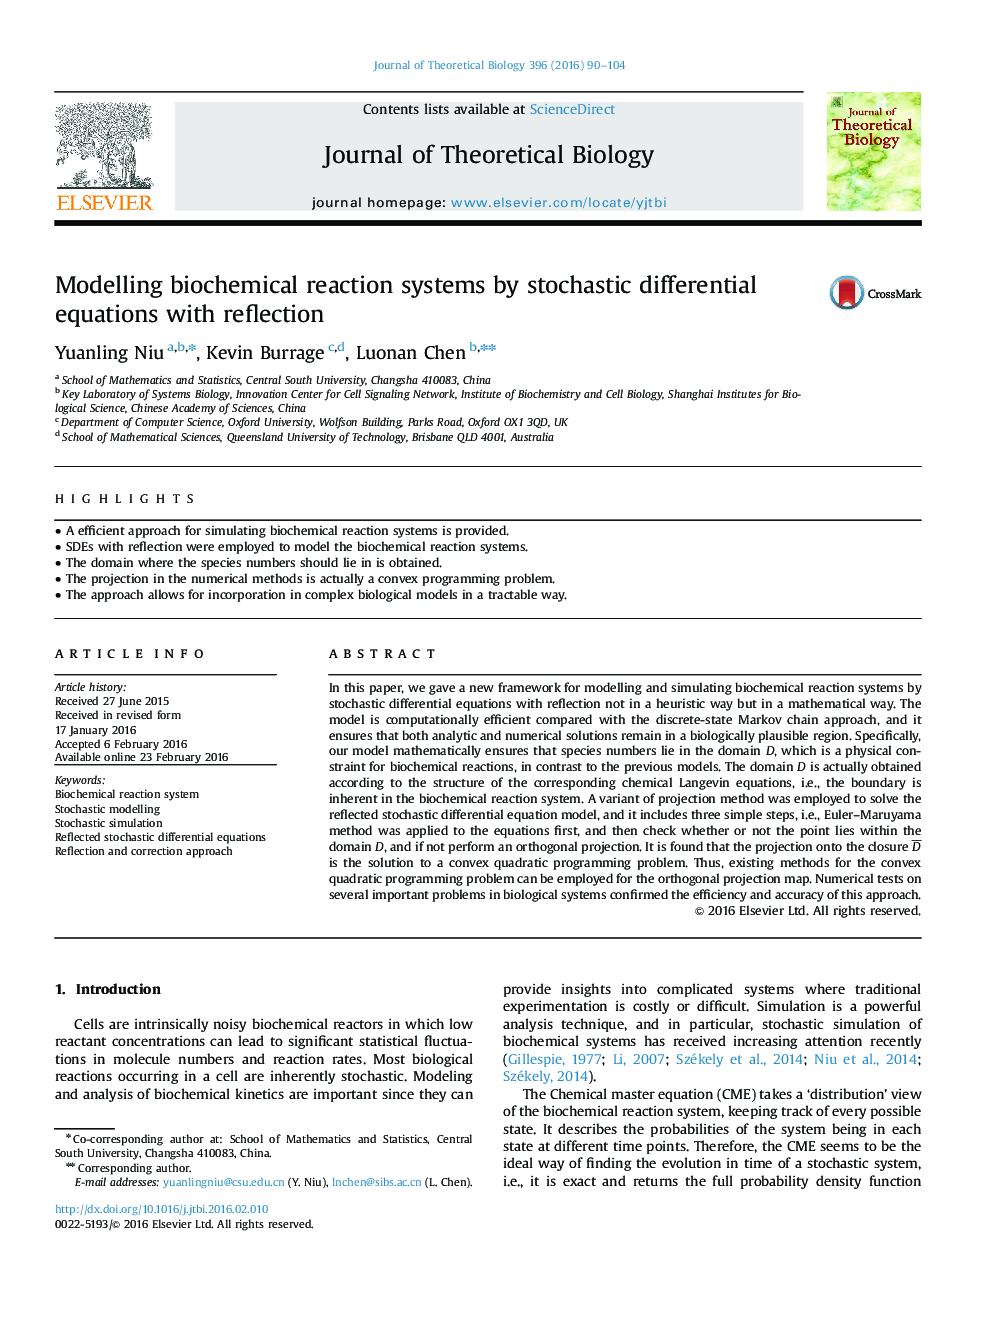 Modelling biochemical reaction systems by stochastic differential equations with reflection